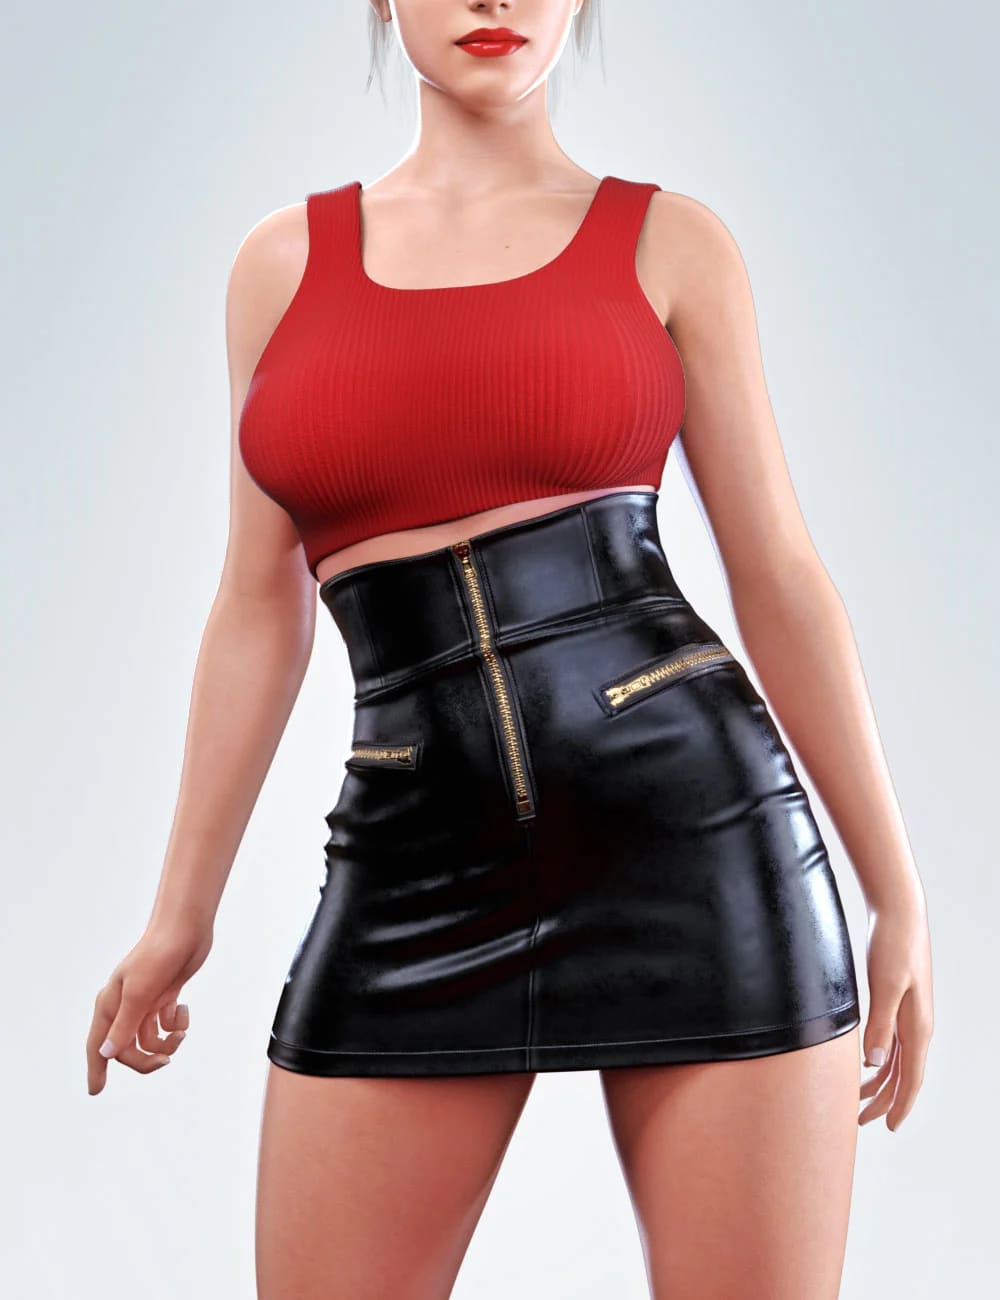 dForce COG Crop Top With Leather Skirt for Genesis 8 and 8.1 Females_DAZ3D下载站